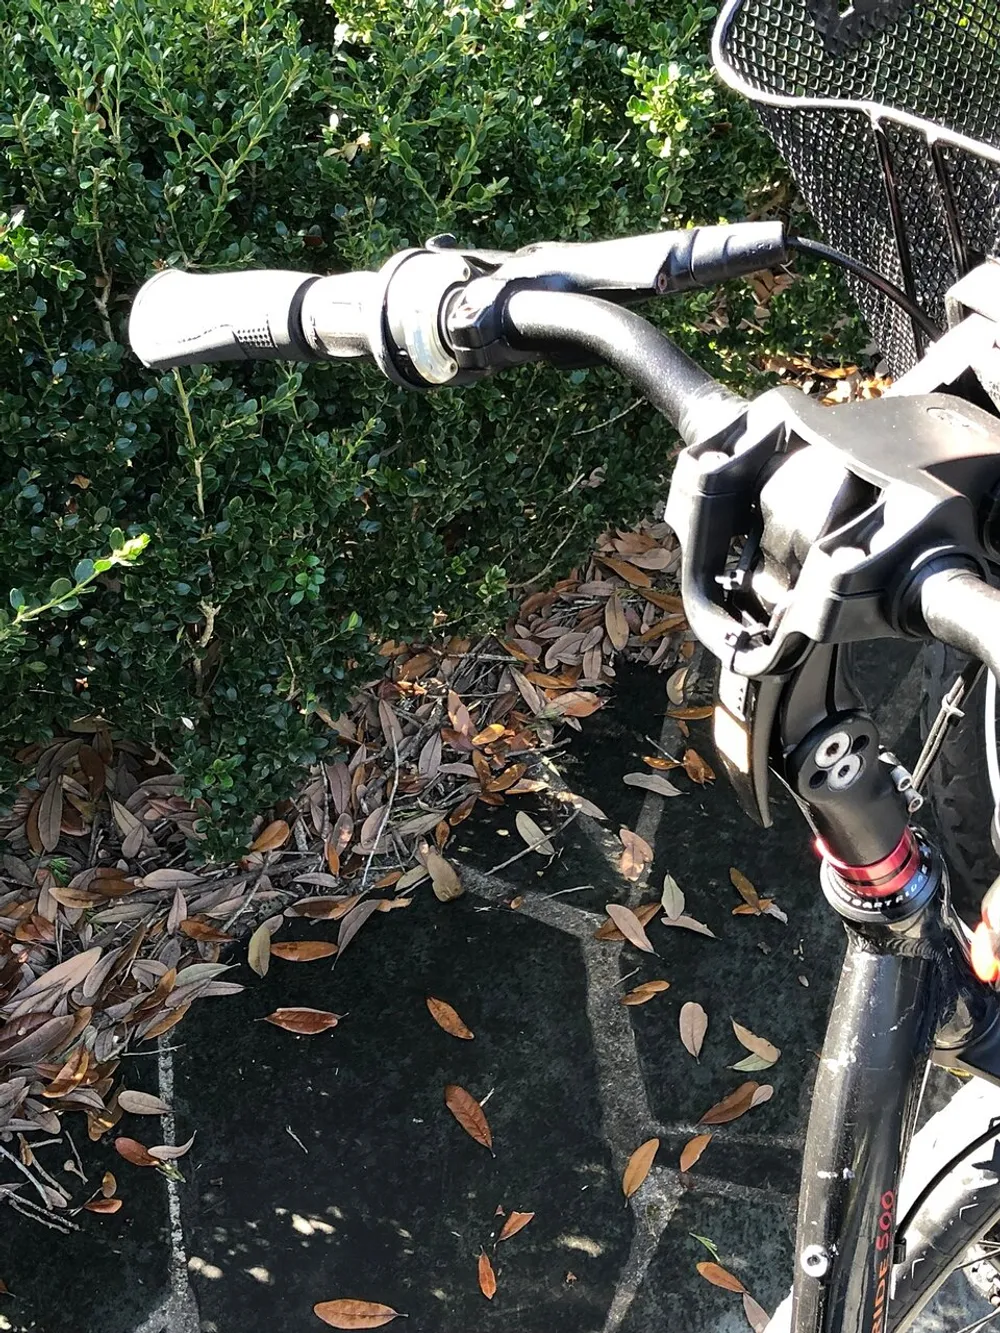 The image shows a close-up view of the handlebar and front section of a bicycle with a basket attached against a backdrop of a hedge and scattered dry leaves on the ground